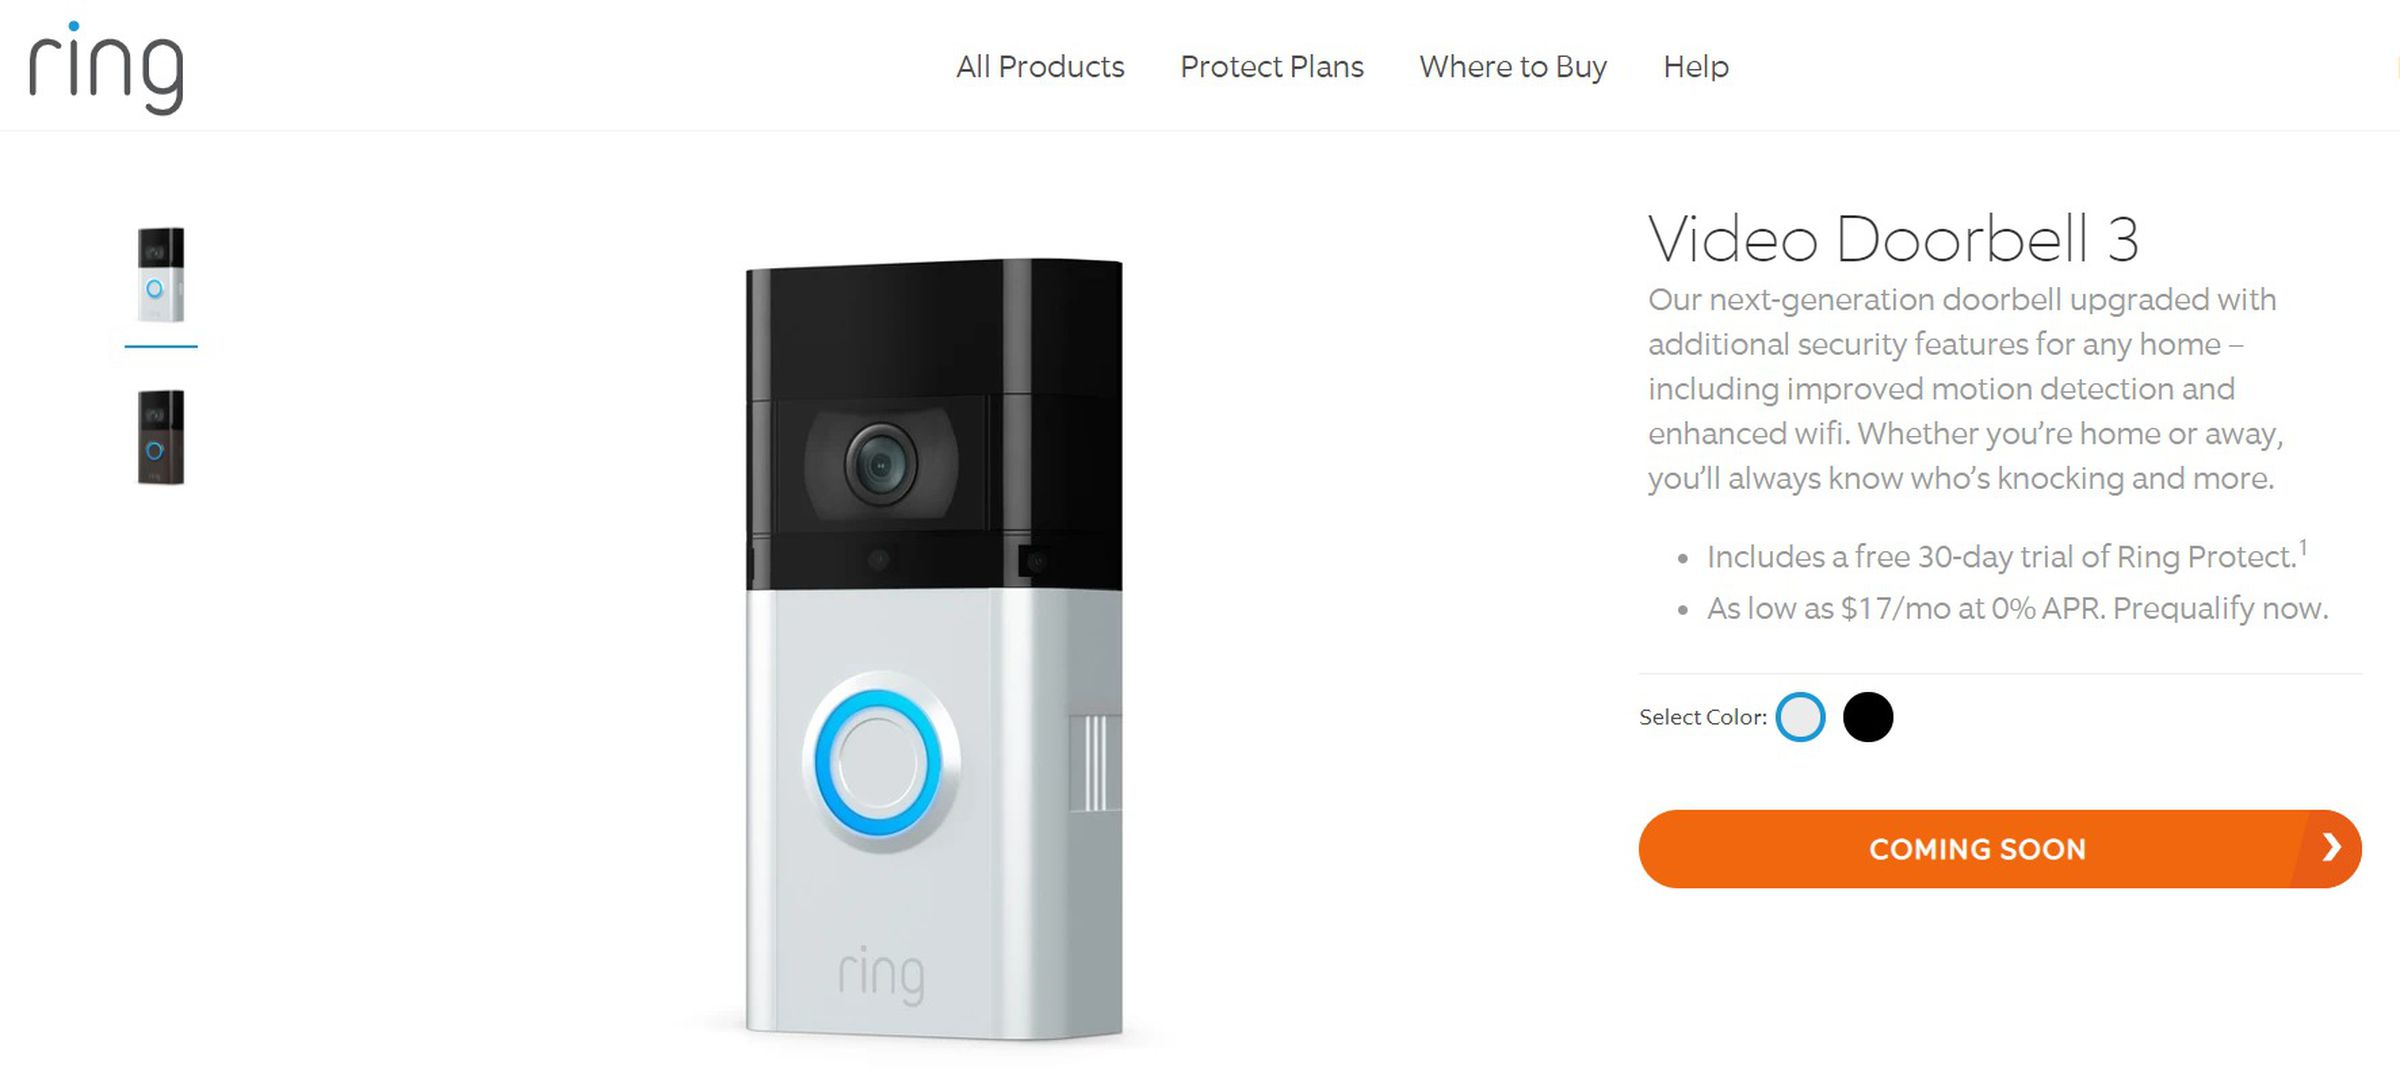 A screenshot of the Ring Video Doorbell 3 product page.